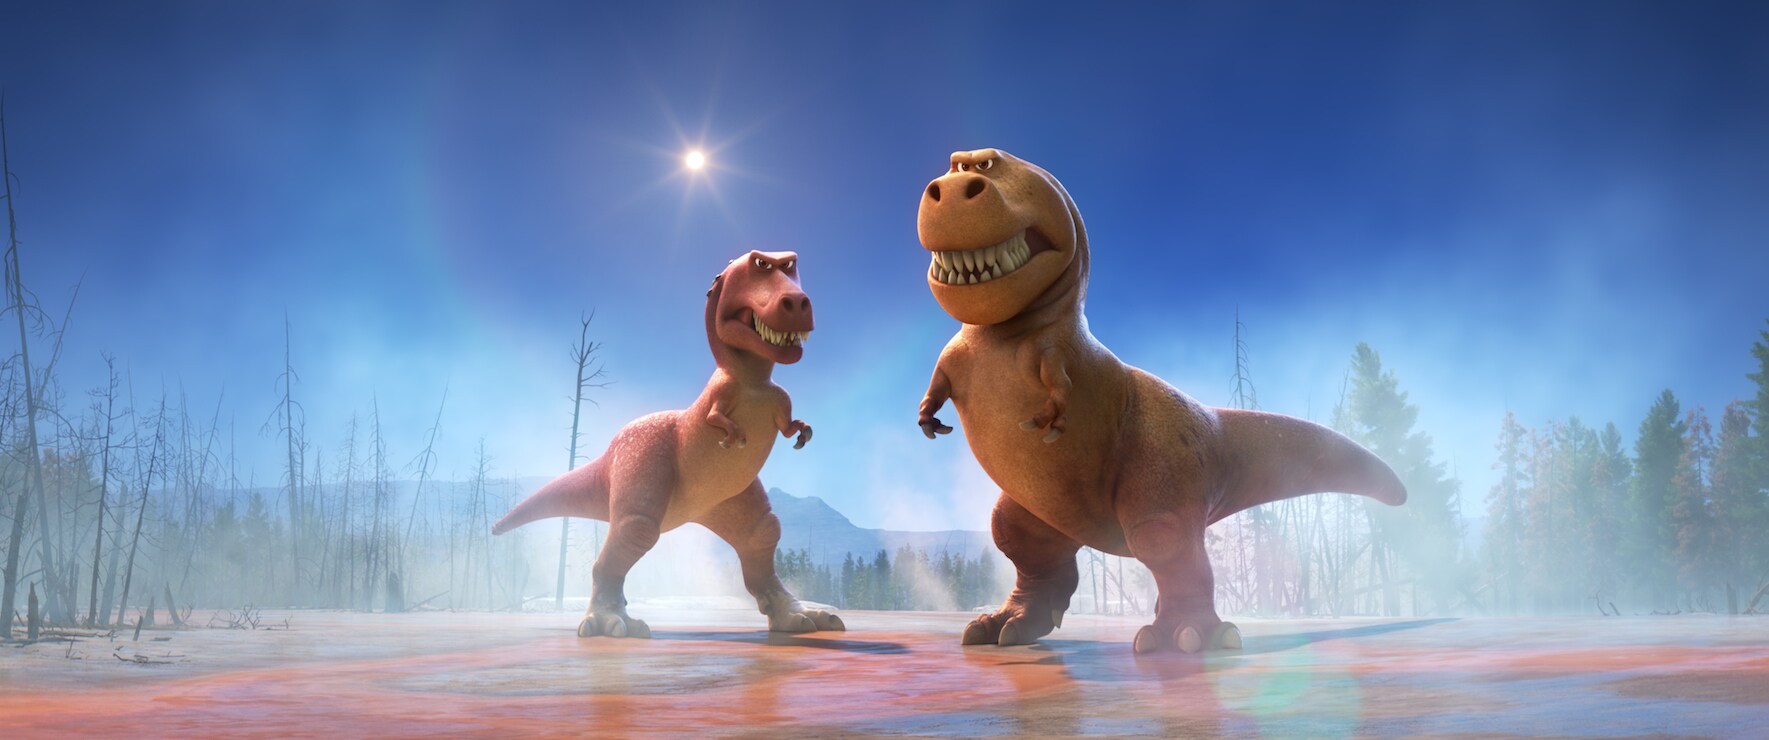 Anna Paquin (Ramsey) and  A.J. Buckley (Nash) in "The Good Dinosaur"